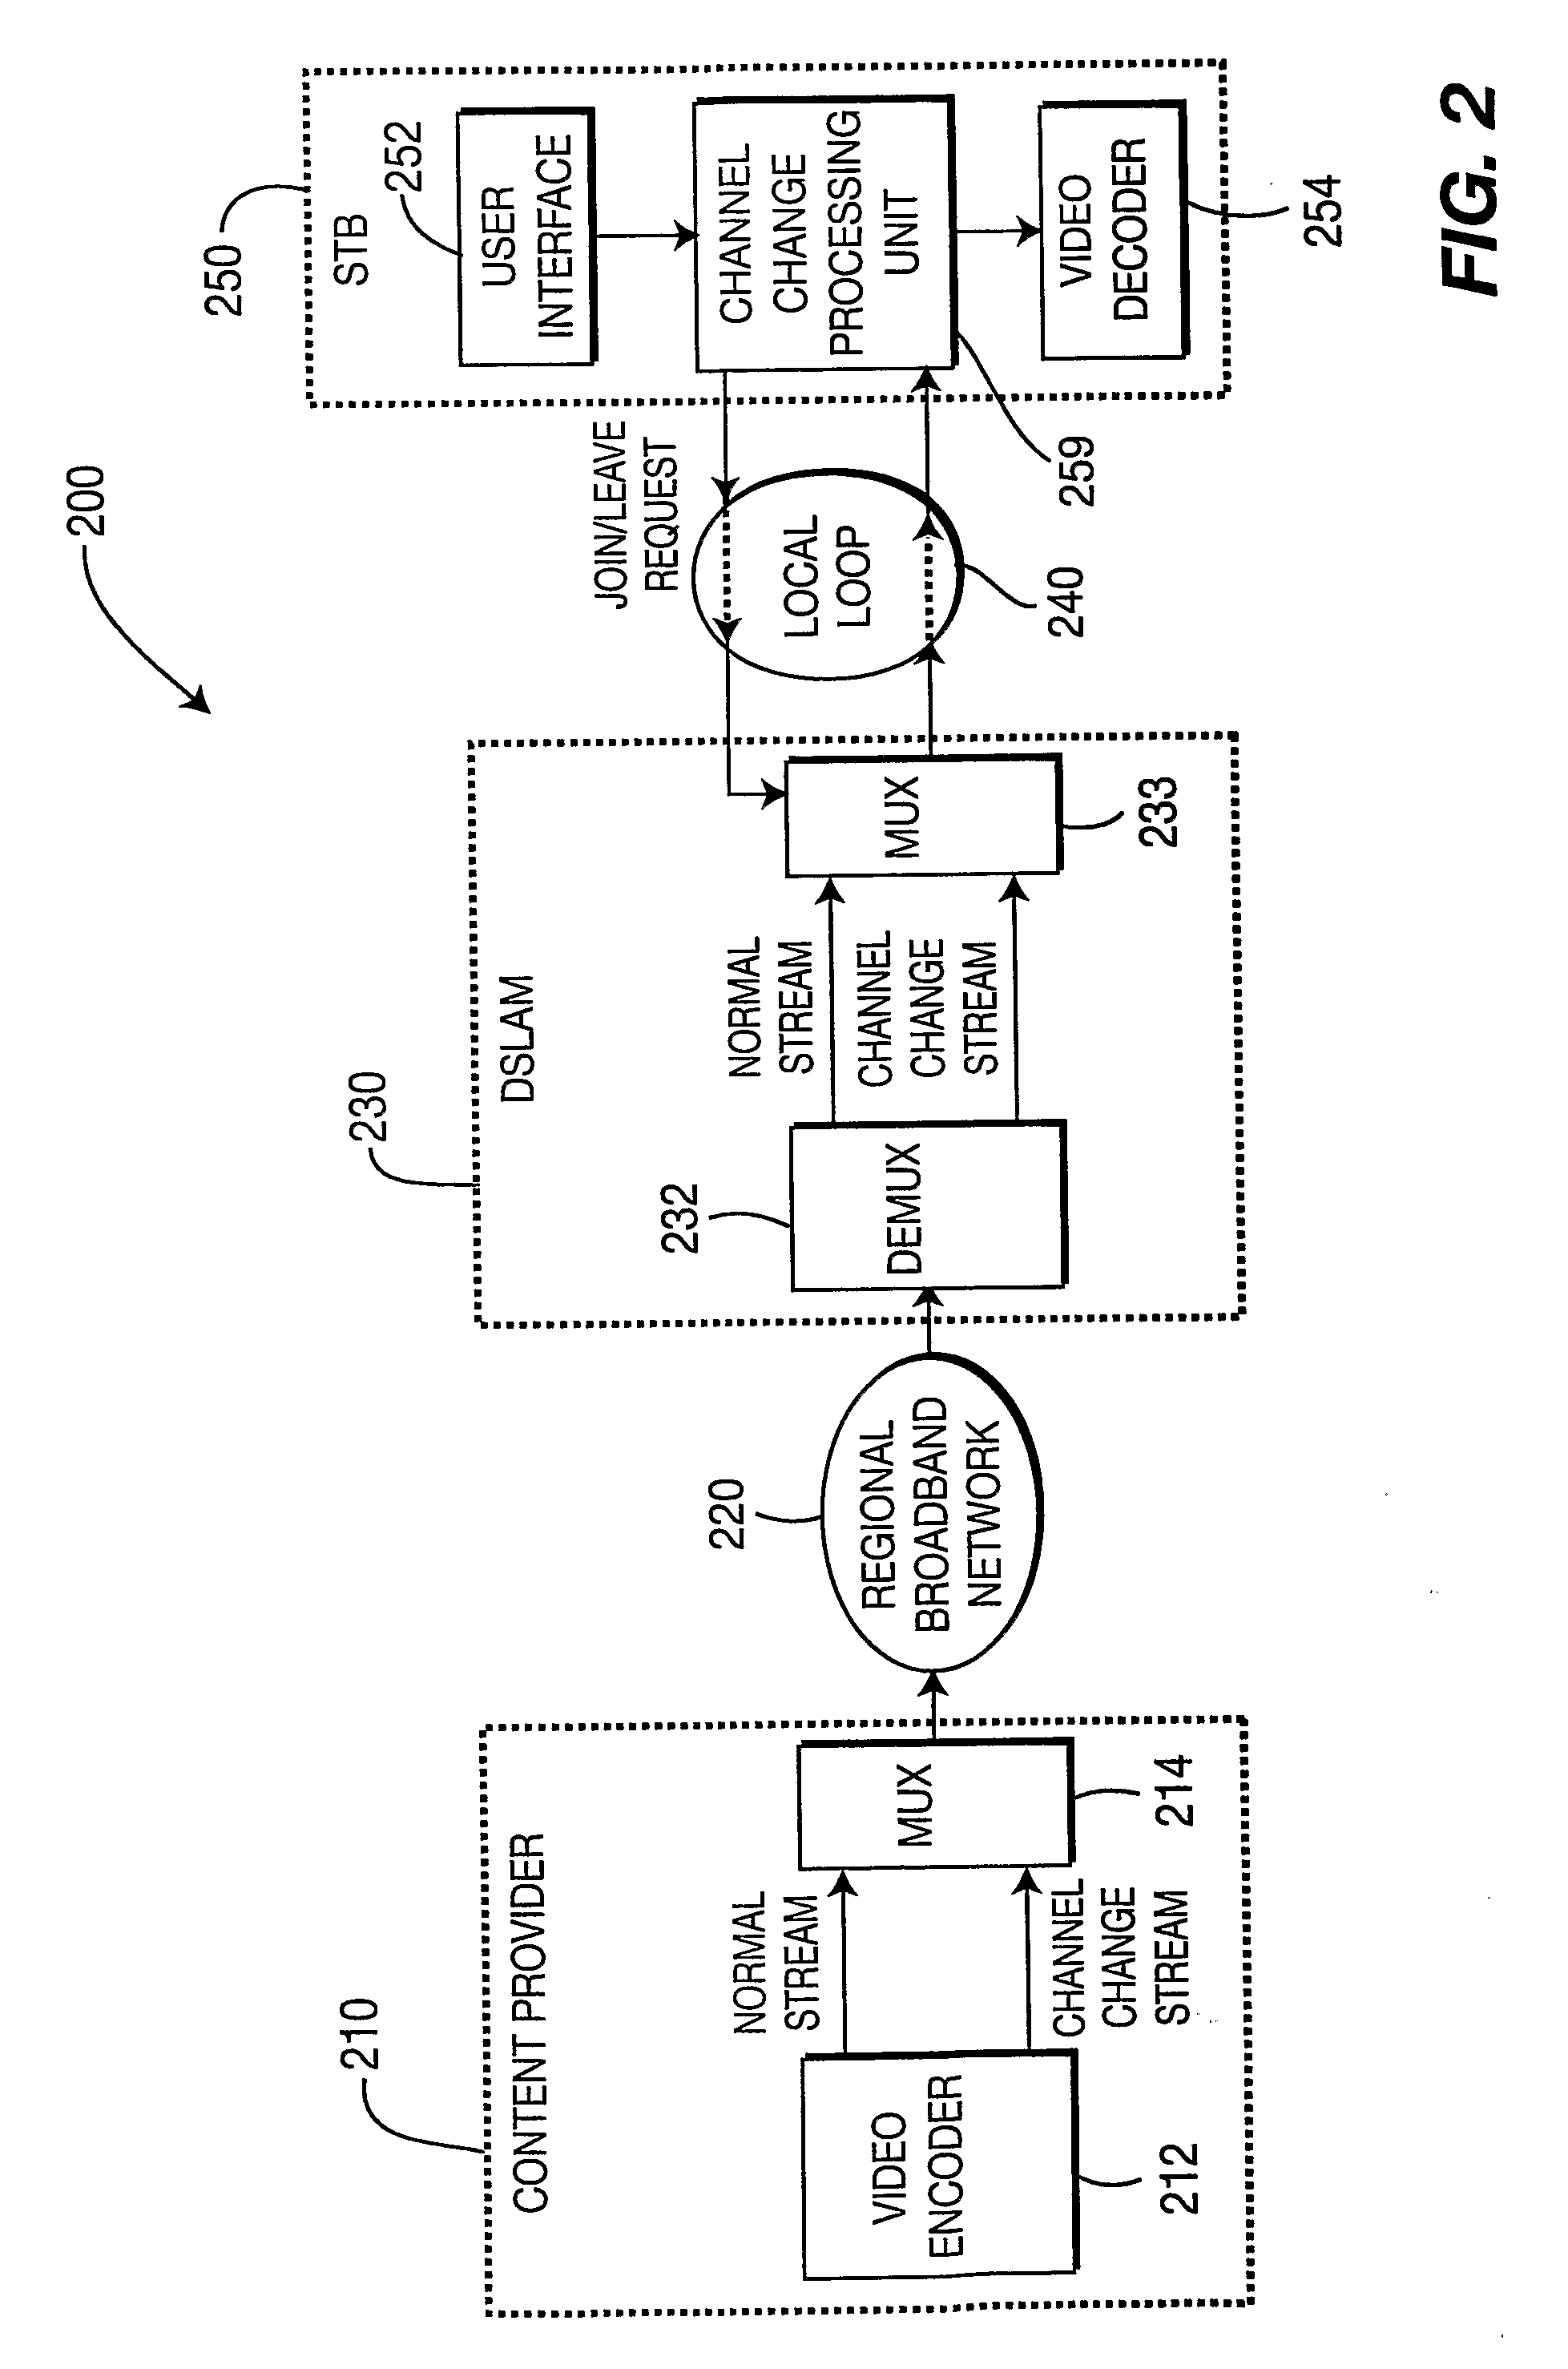 Method and Apparatus for Channel Change in Dsl System